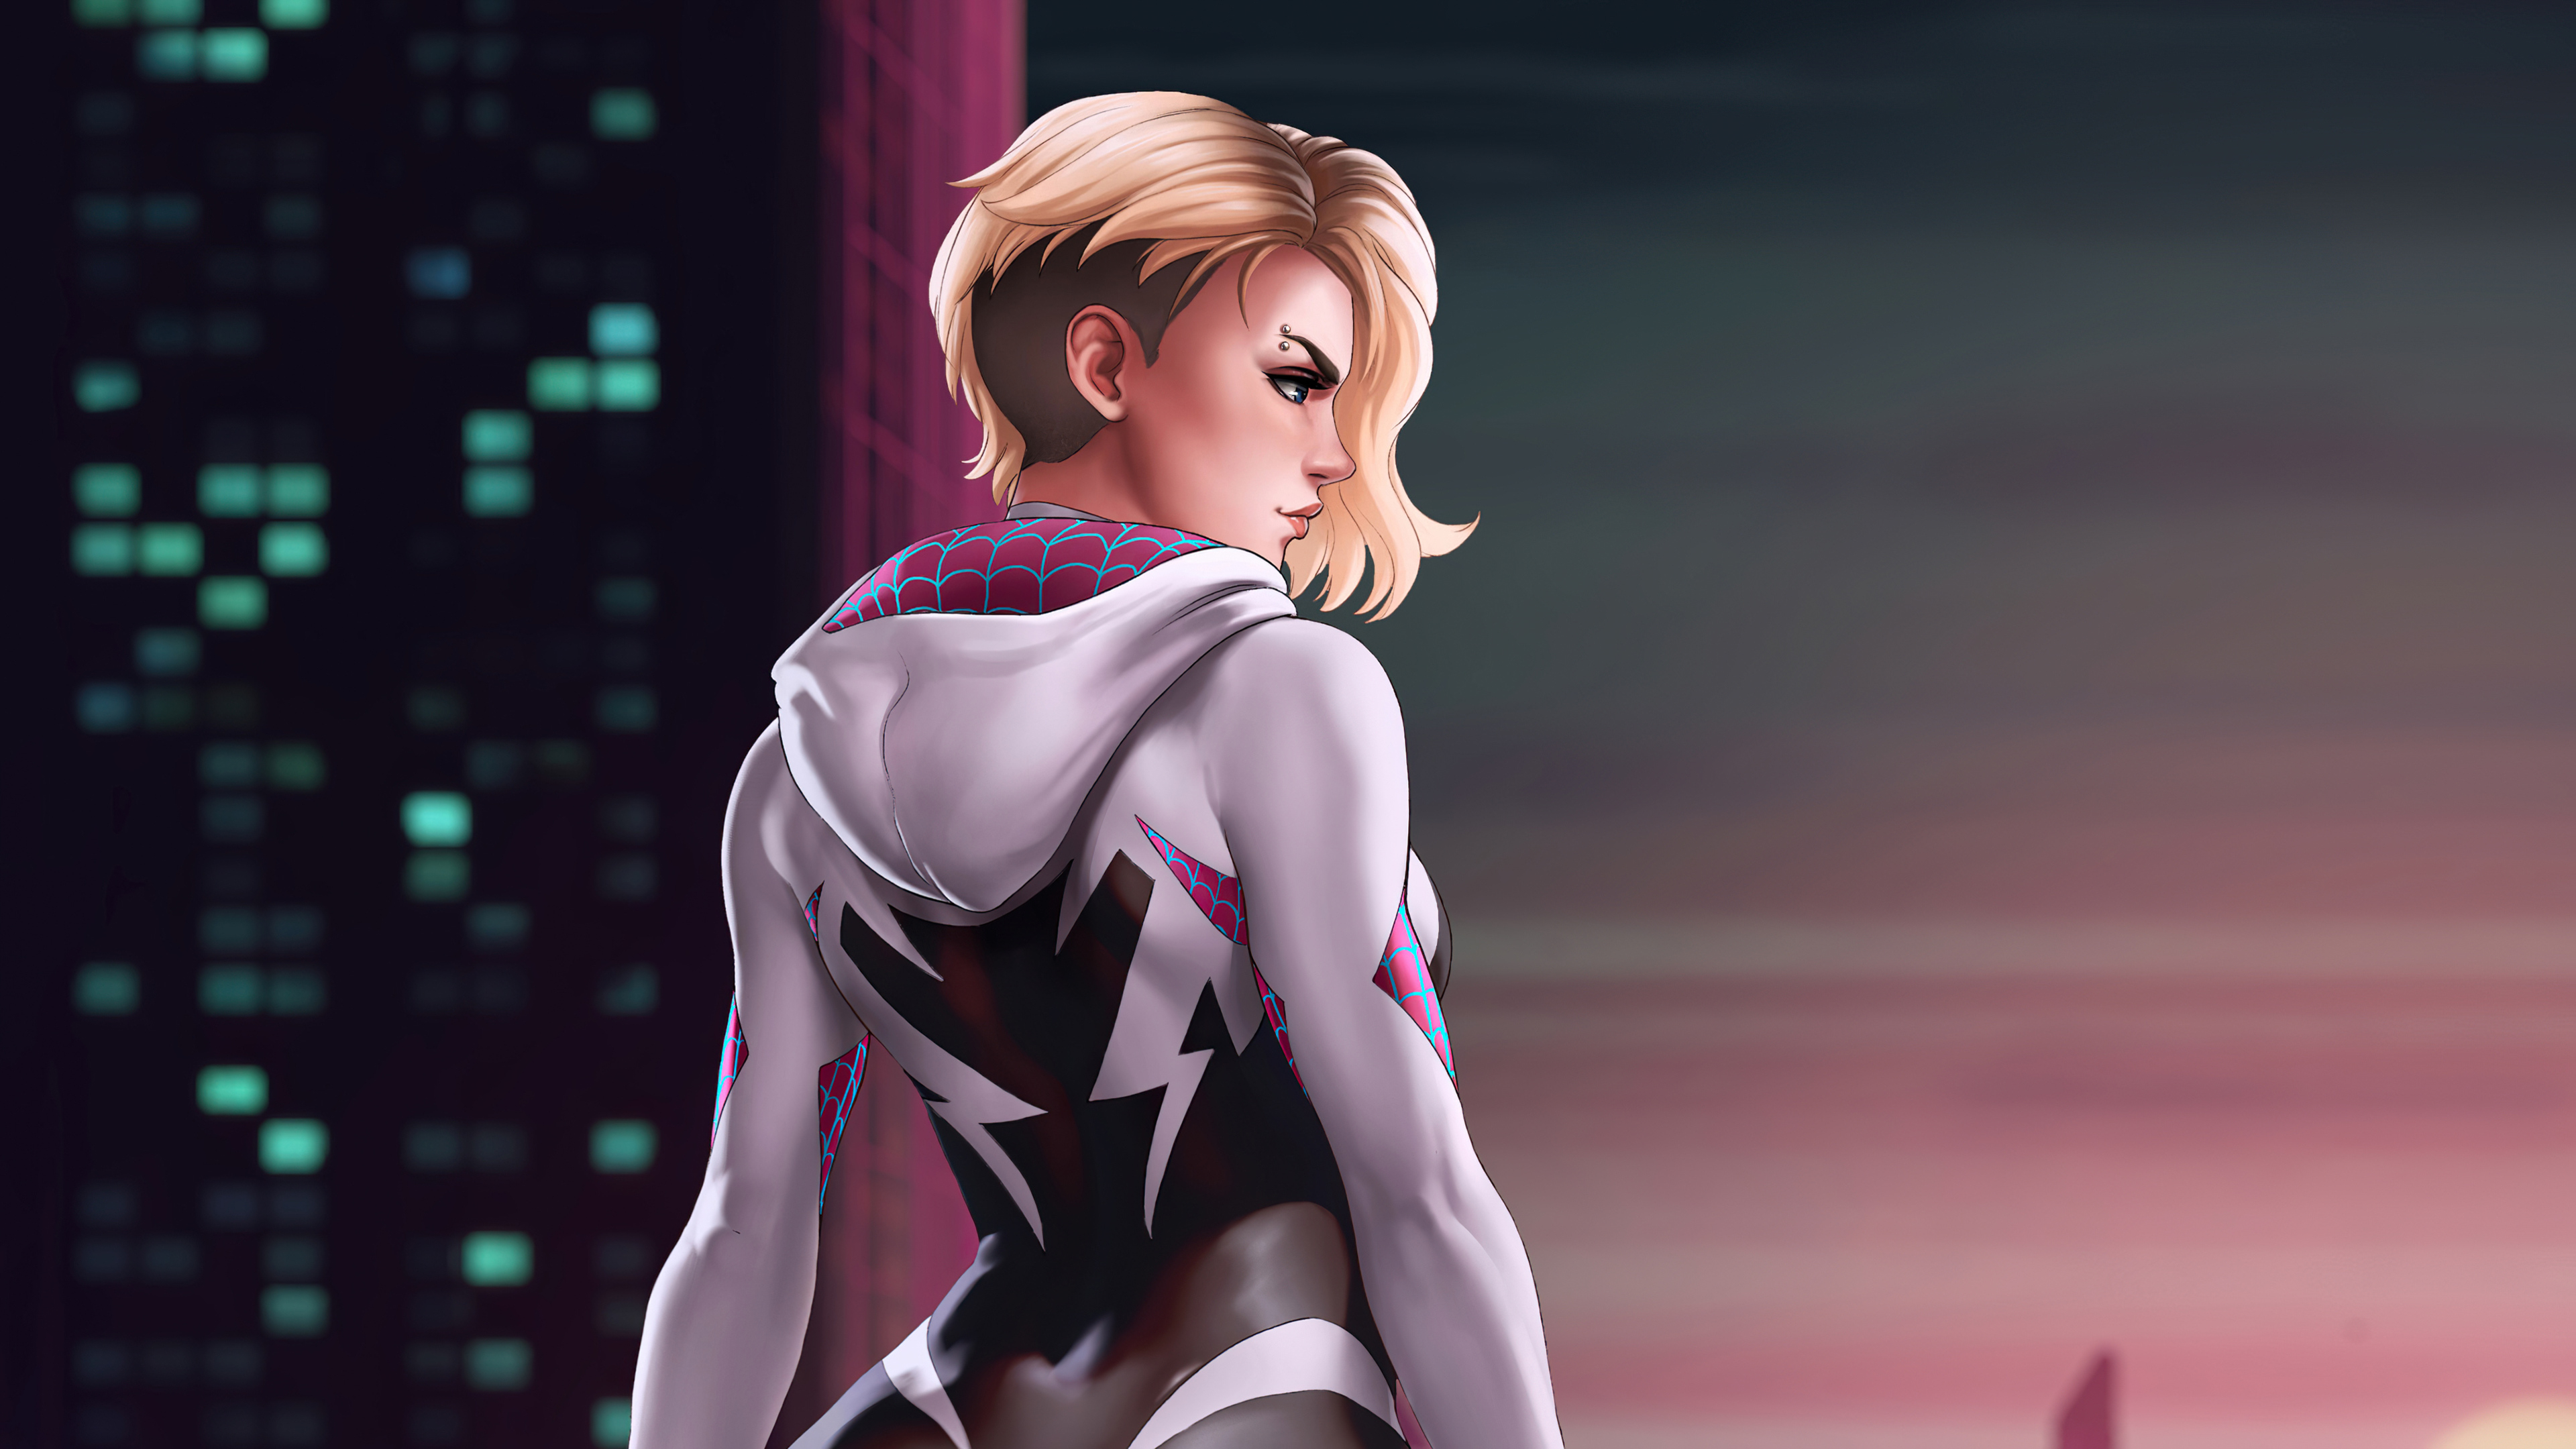 3840x2160 Spider Gwen Marvel Art 4k 4k HD 4k Wallpapers, Images, Backgrounds, Photos and Pictures